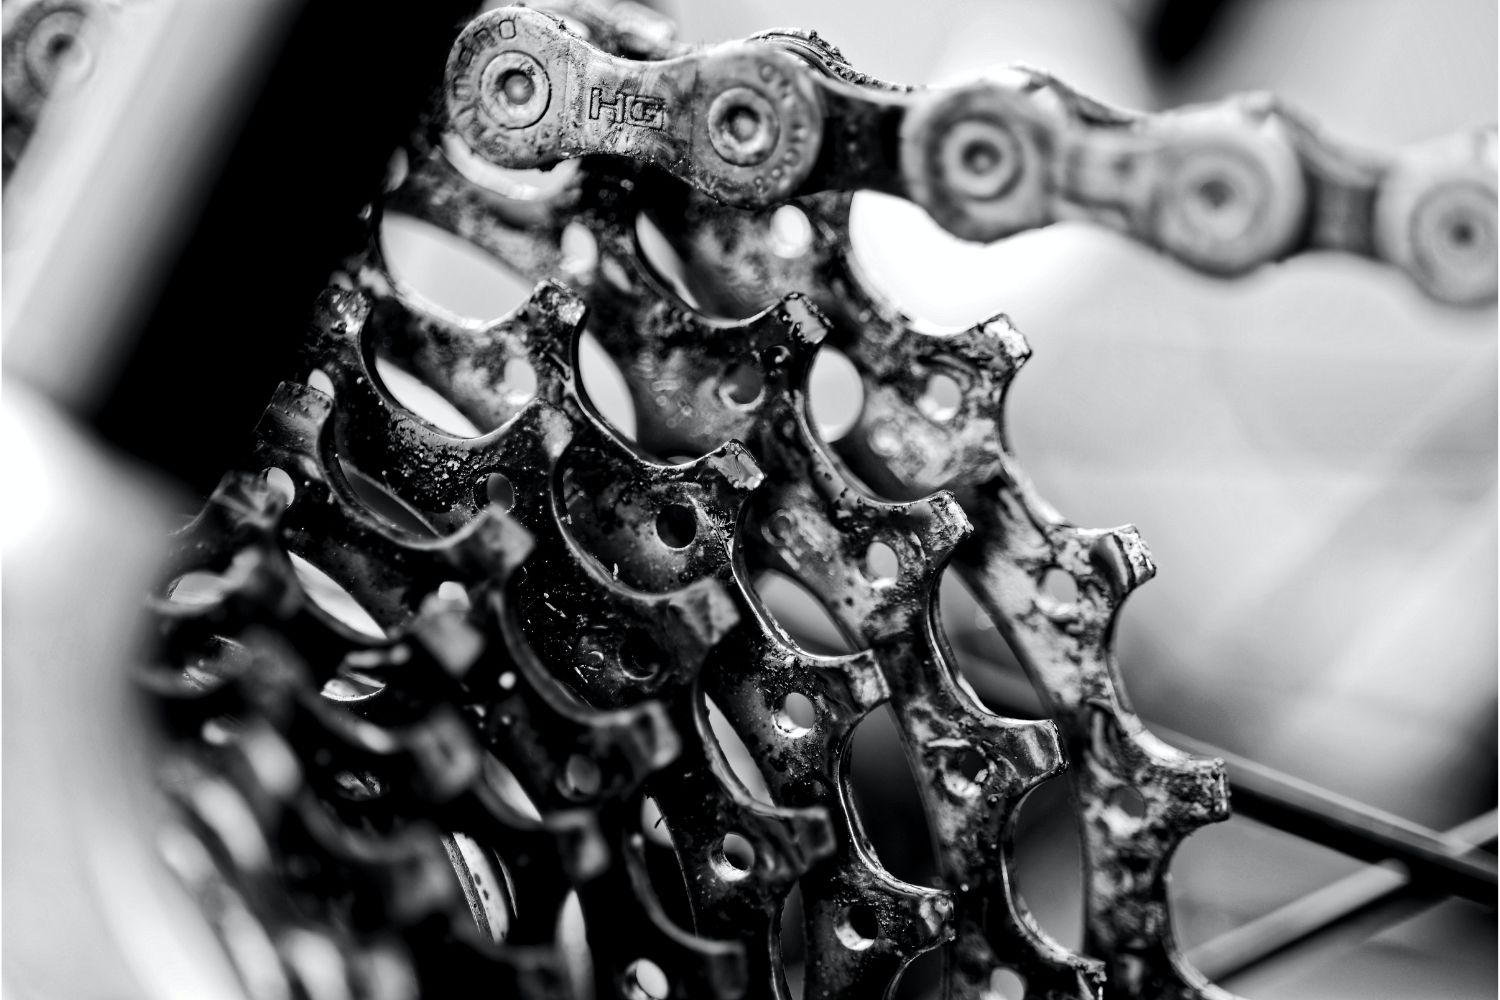 Top 6 Best Bicycle Chain Cleaners in 2022